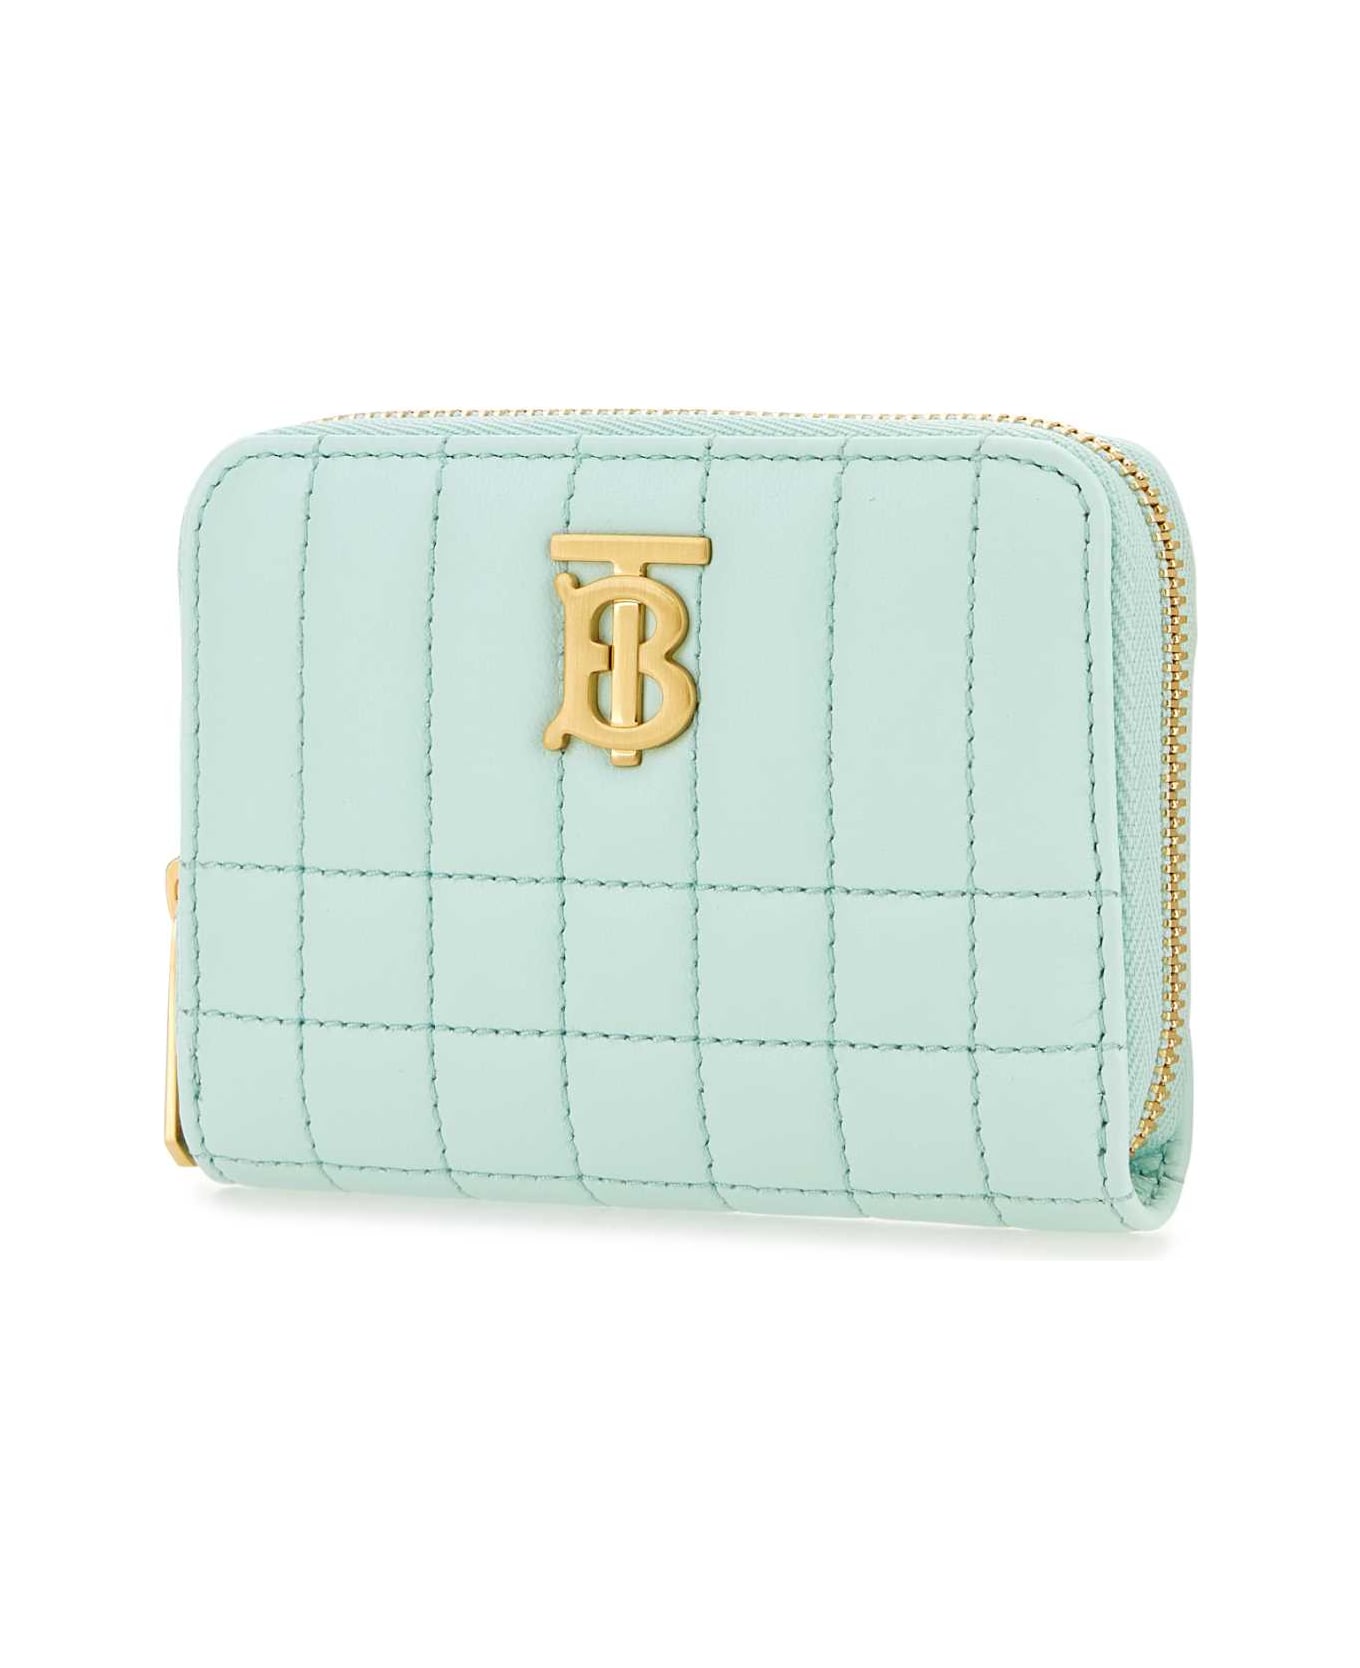 Burberry Pastel Light-blue Nappa Leather Lola Wallet - COOLMINT